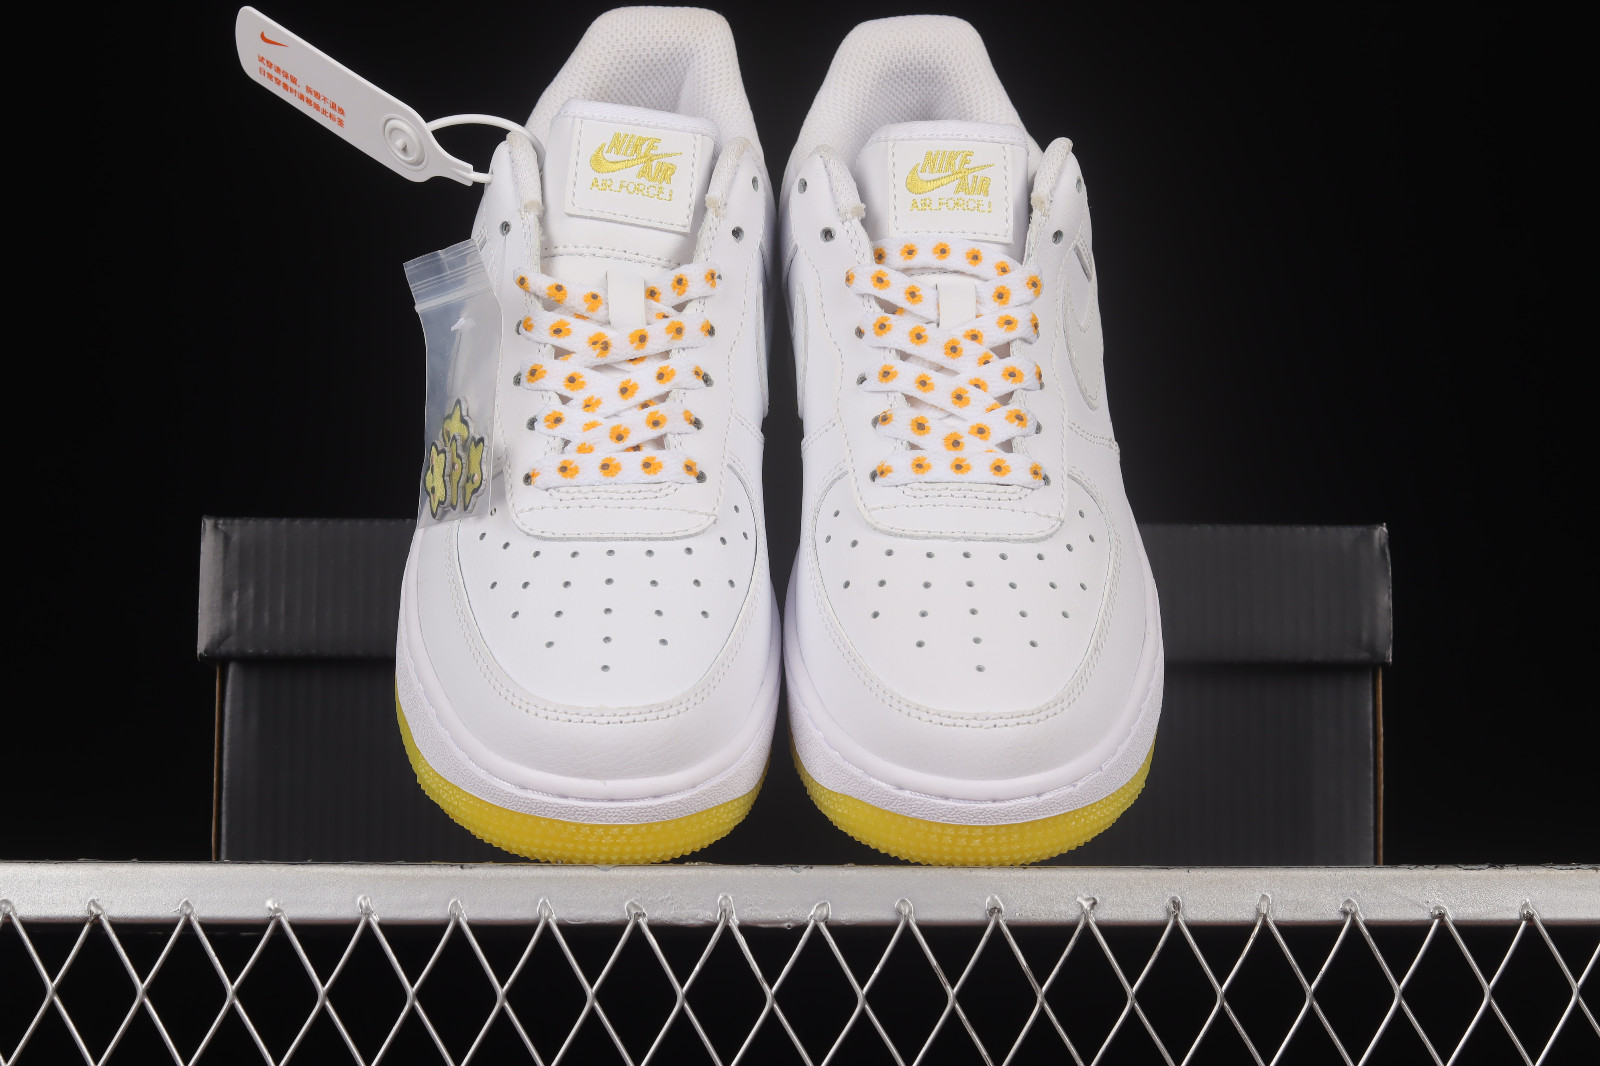 Hilarisch Buitenlander voorbeeld 098 - GmarShops - nike kd 6 lifestyle wholesale outlet list - Nike Air  Force 1 07 Low White Yellow Metallic Gold CR6566